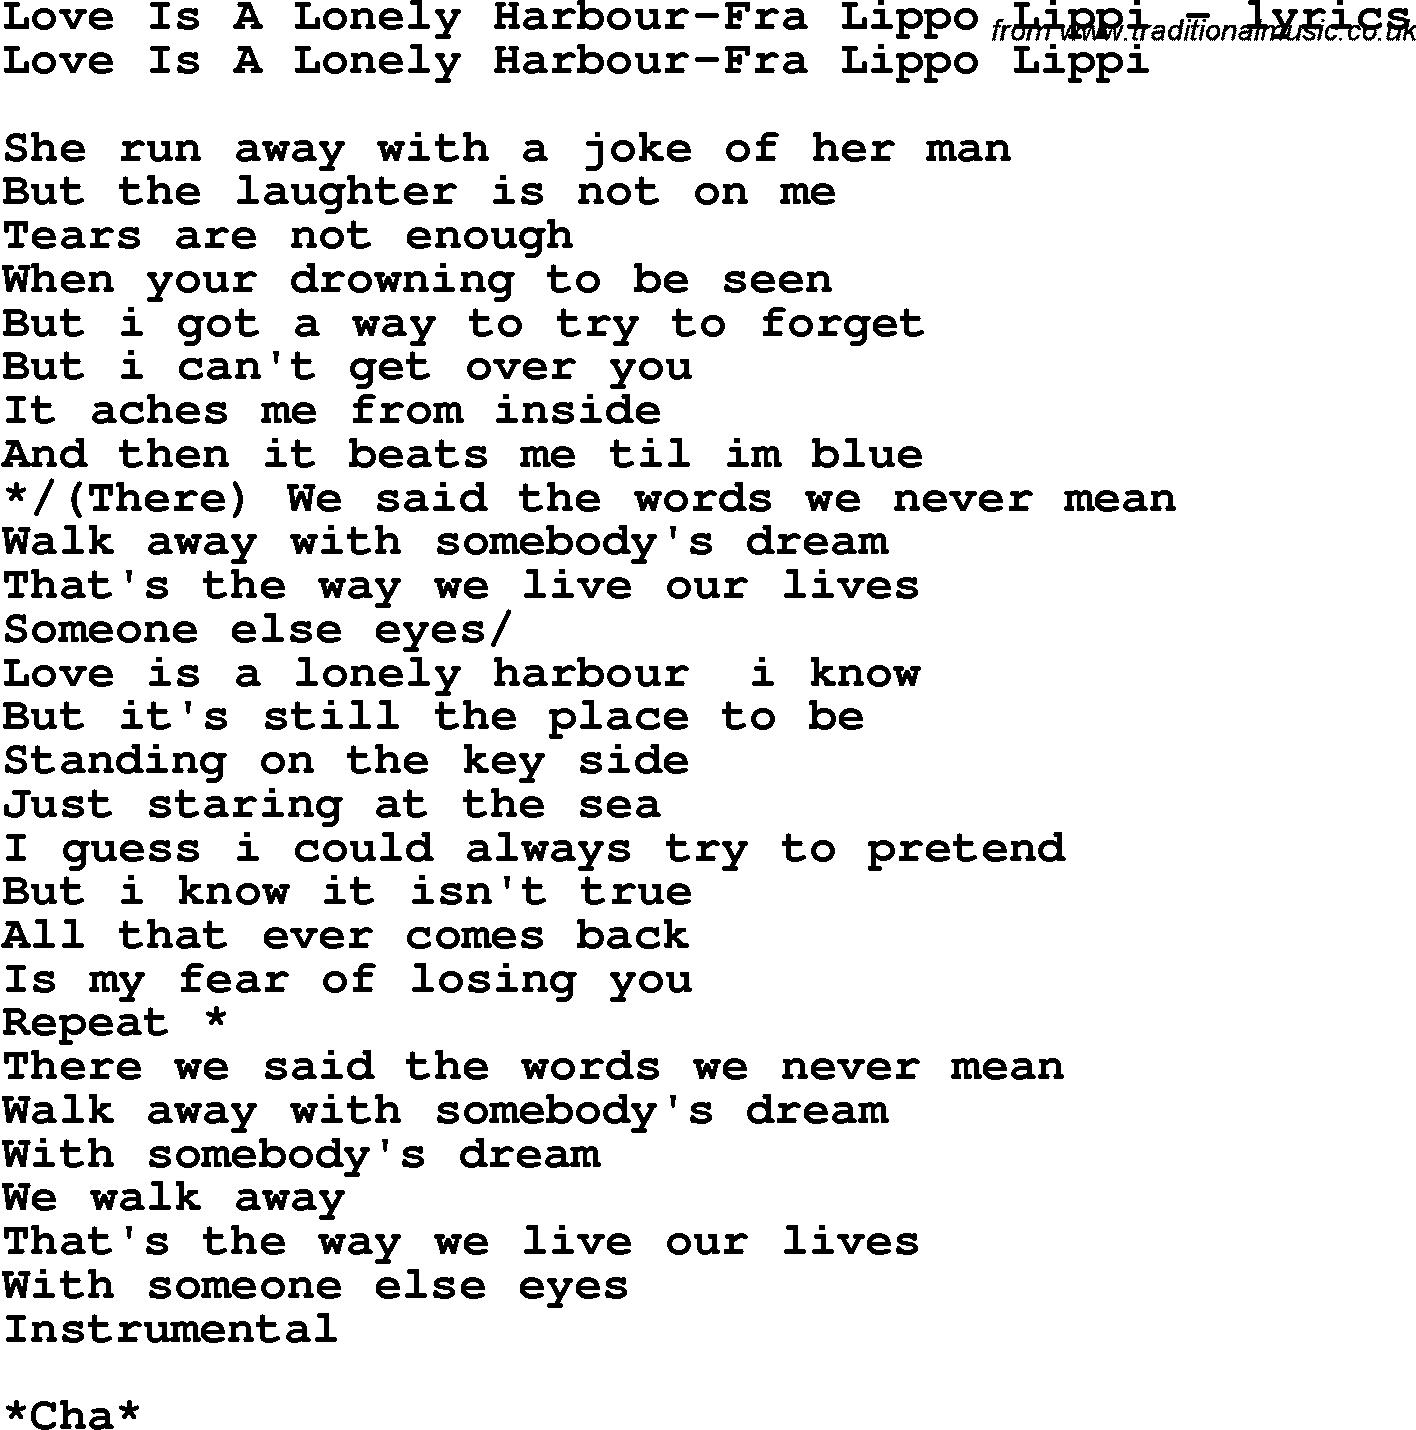 Love Song Lyrics for: Love Is A Lonely Harbour-Fra Lippo Lippi